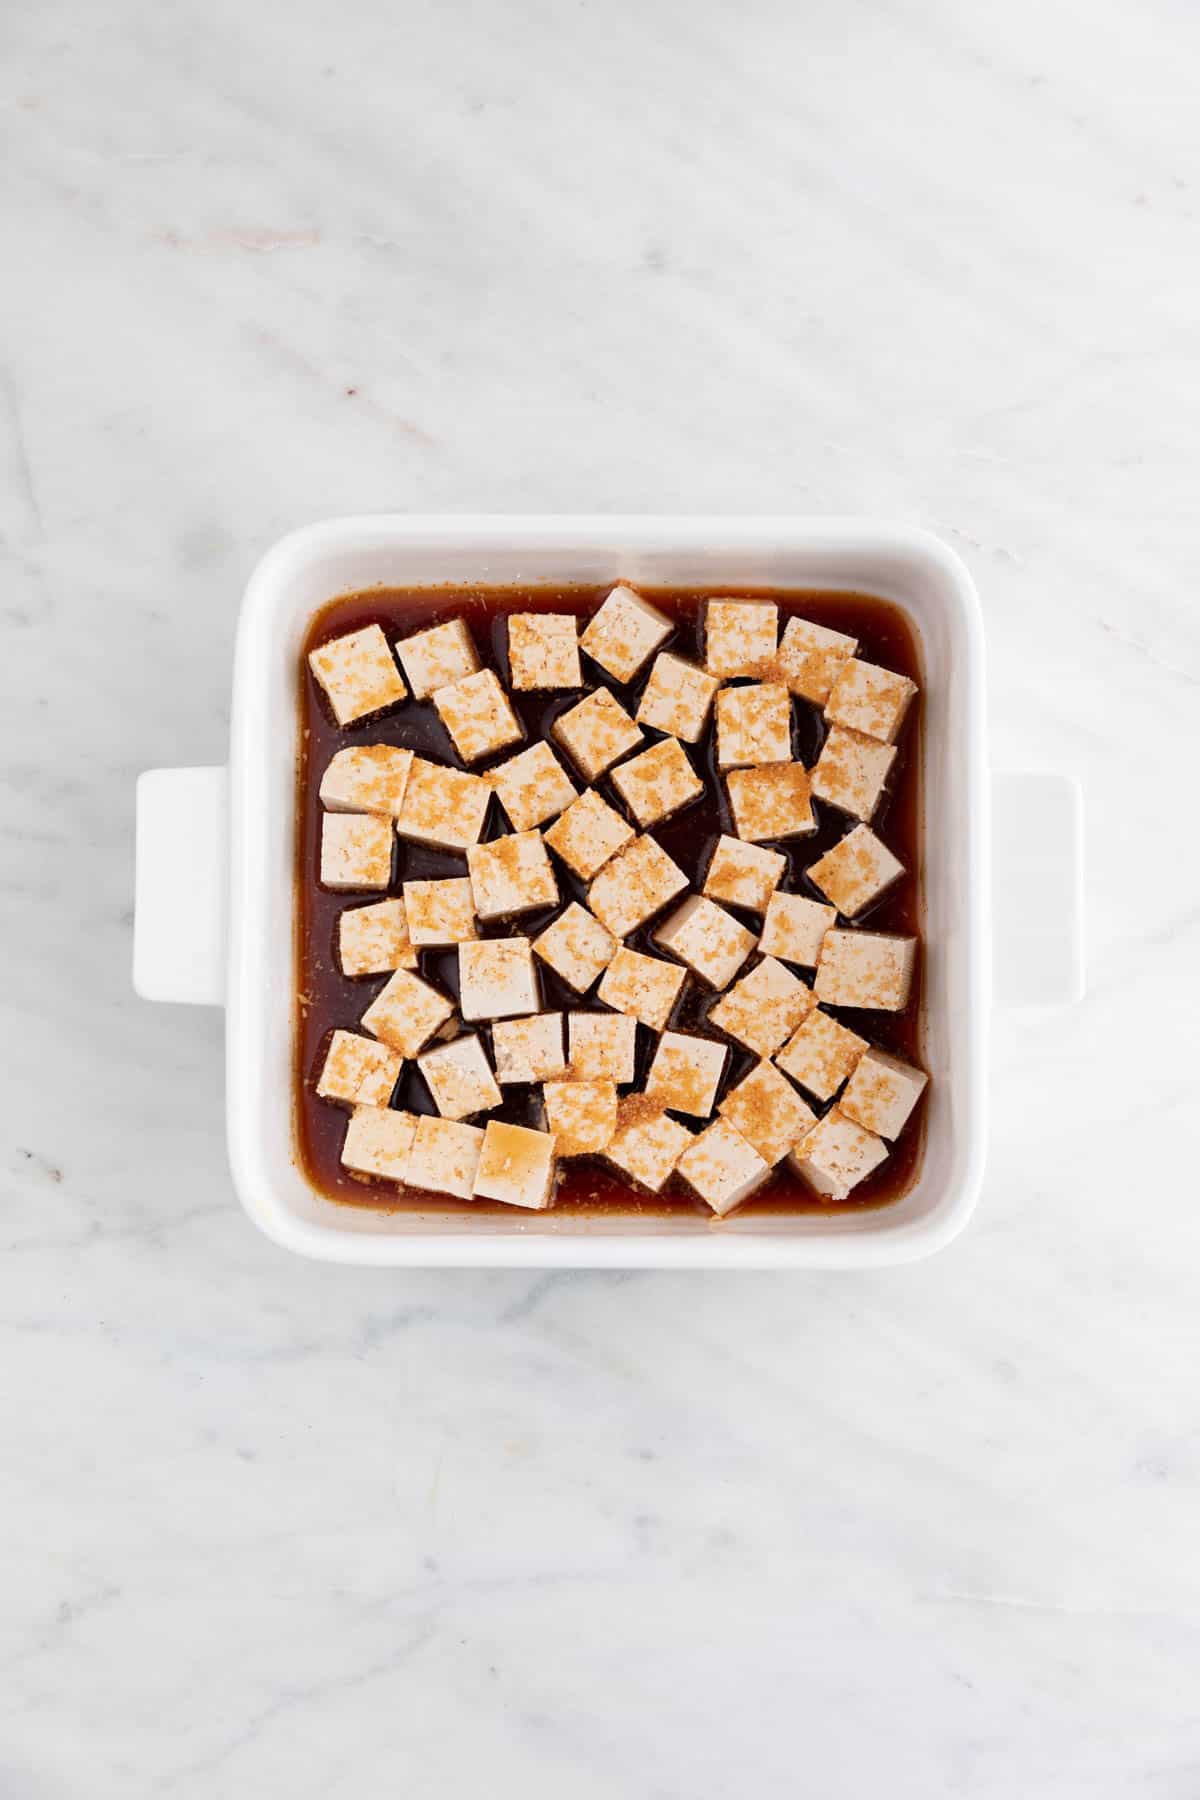 Tofu cubes in a shallow dish with the marinade liquid.